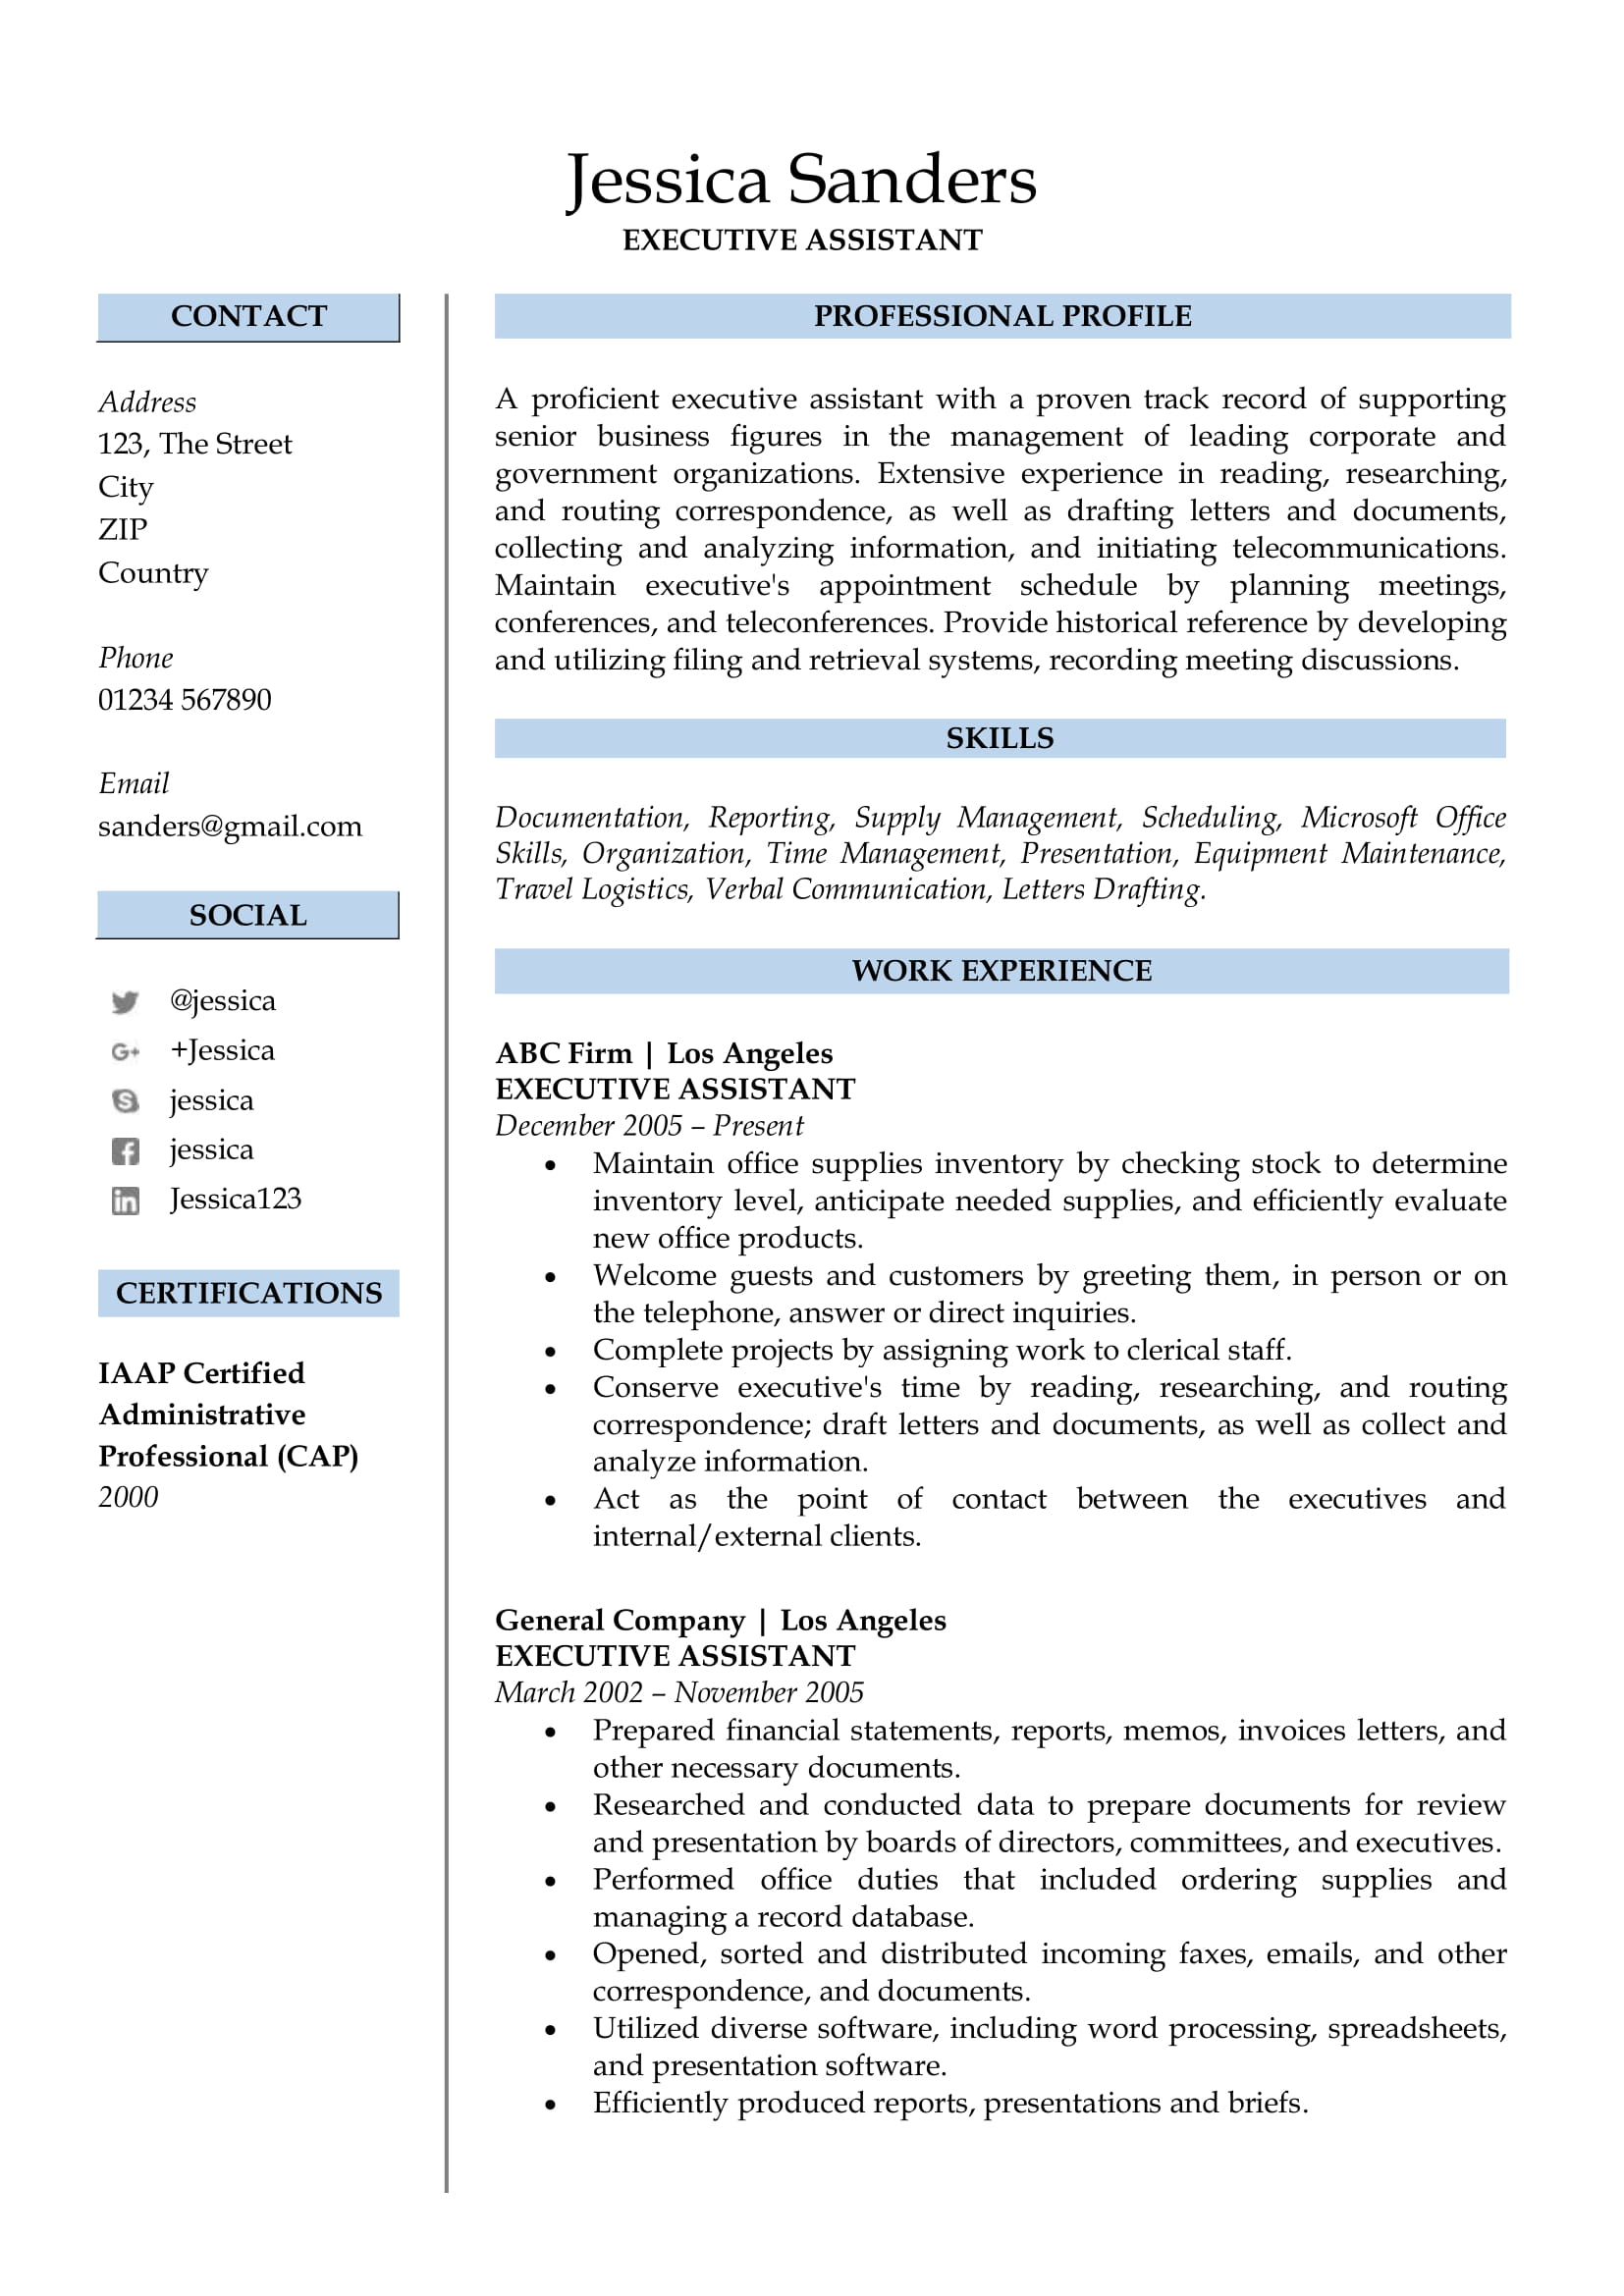 Is it worth it to use a resume writing service